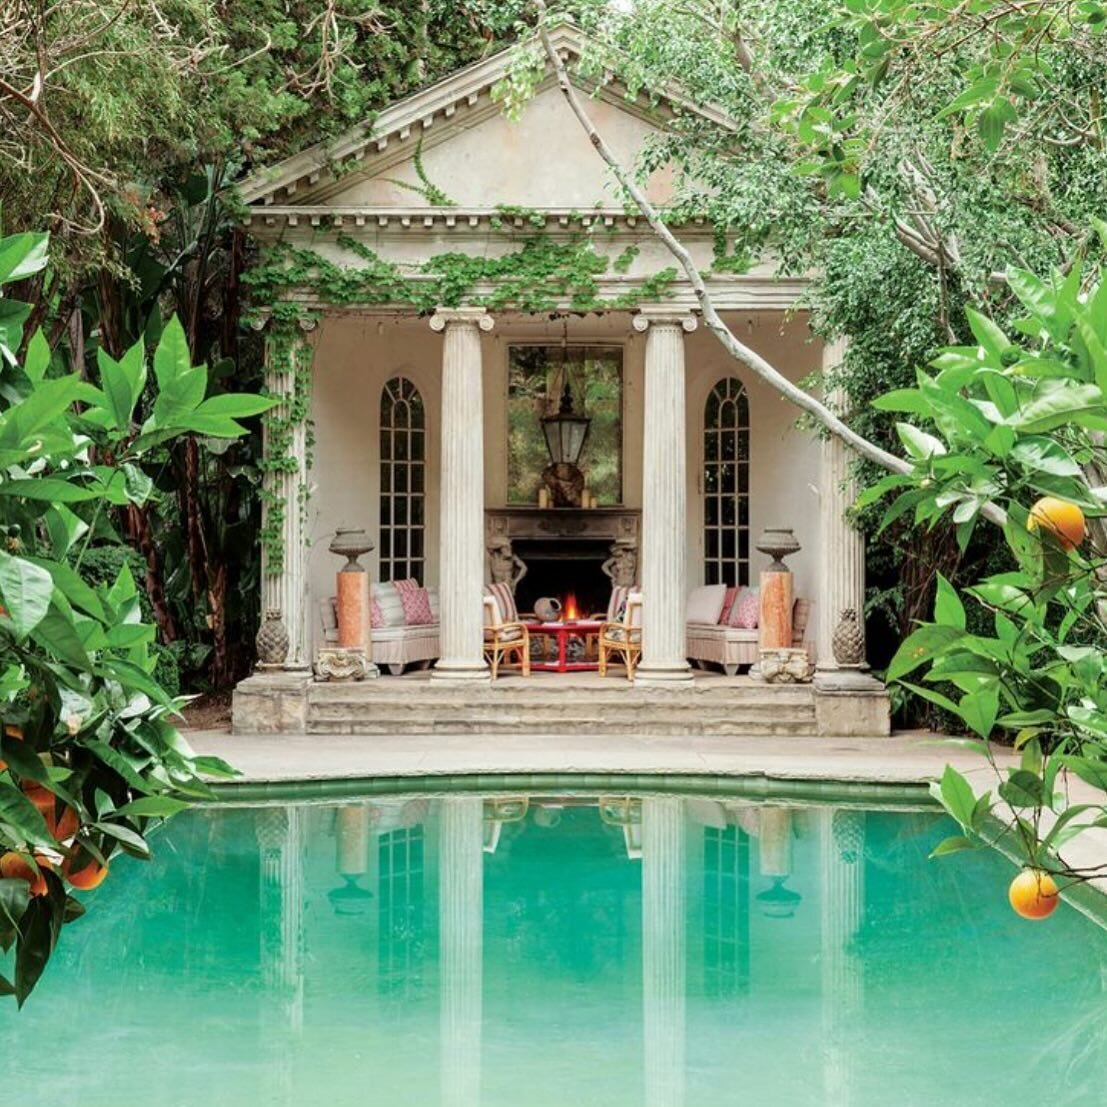 🍊🍊🍊This is what perfection looks like, Richard Shapiro&rsquo;s Palladian poolhouse built from the exact specifications in Palladio&rsquo;s 16th century book&hellip;
#palladian #palladianarchitecture #poolhouse #classicism #classicist #andreapallad